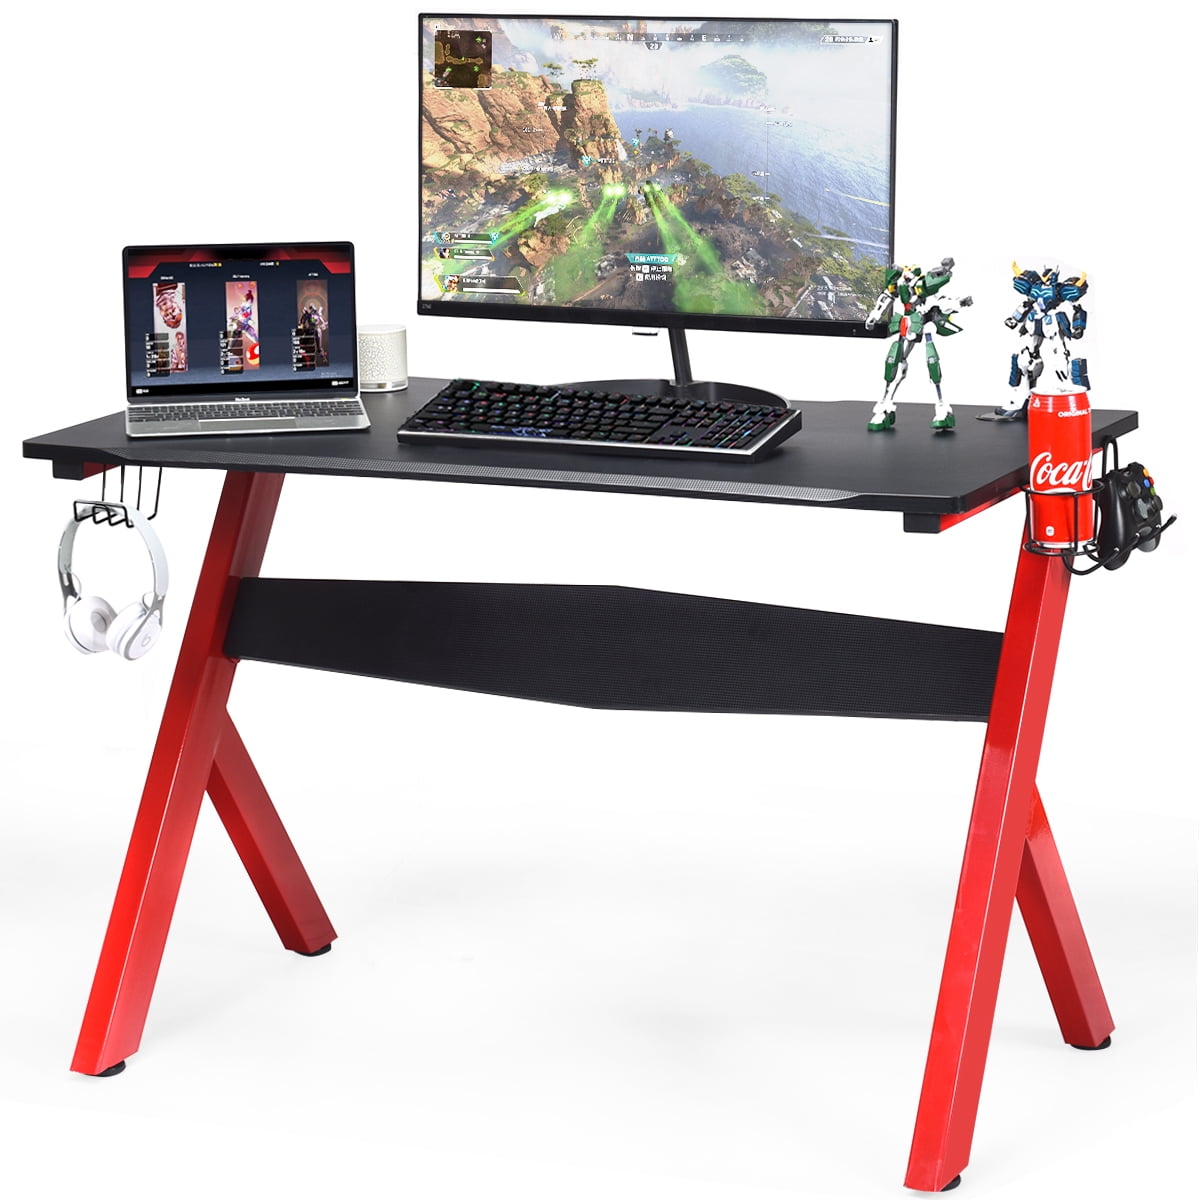 Details about   40 inch Gaming Desk  Removable Monitor Shelf and Cup Headphone Gamepad Holder 